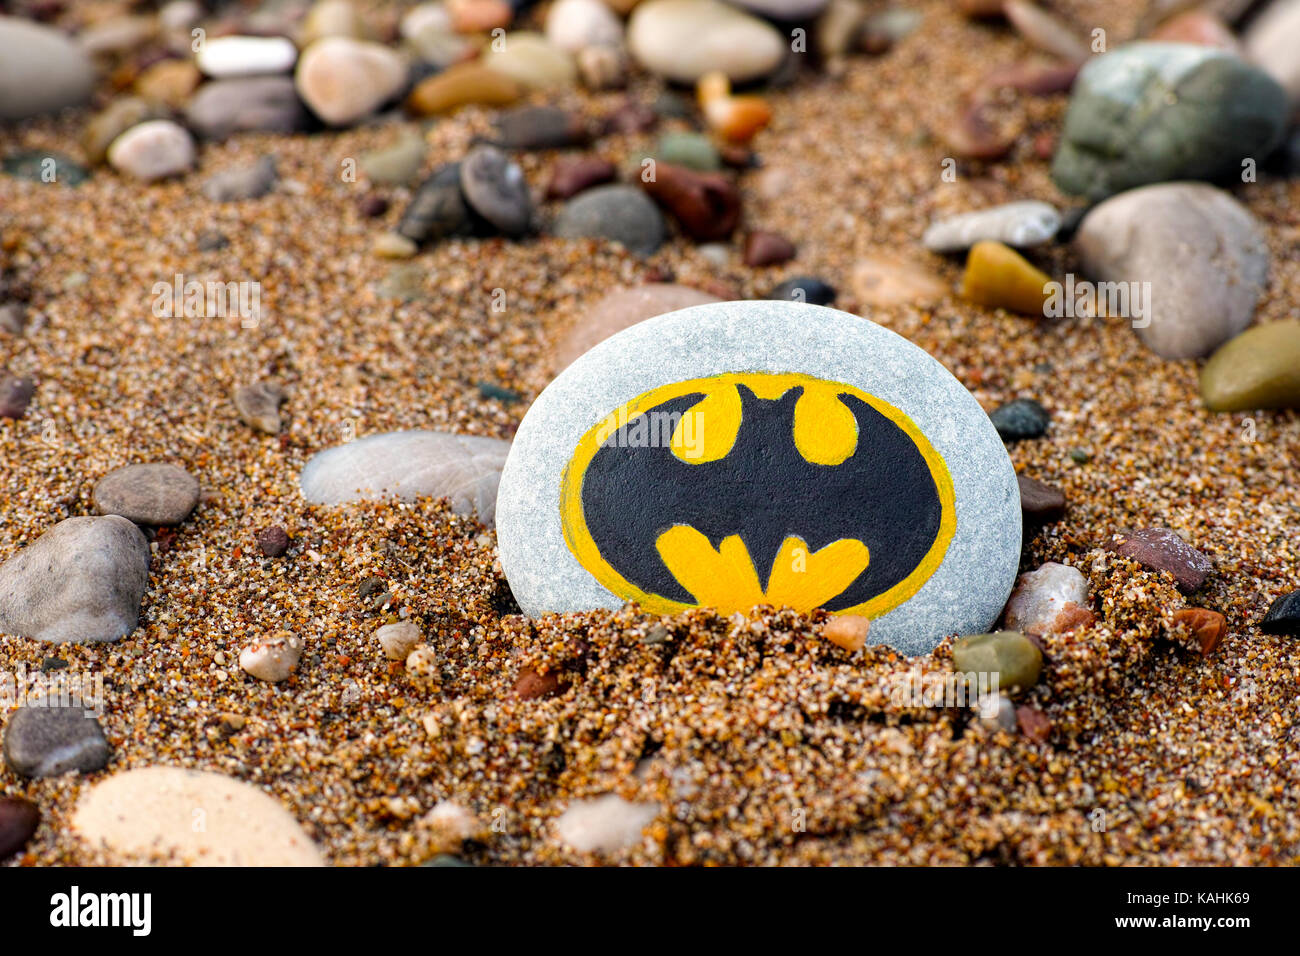 Paphos, Cyprus - November 22, 2016 Pebble with painted sign Batman on beach with sand and pebbles. Stock Photo